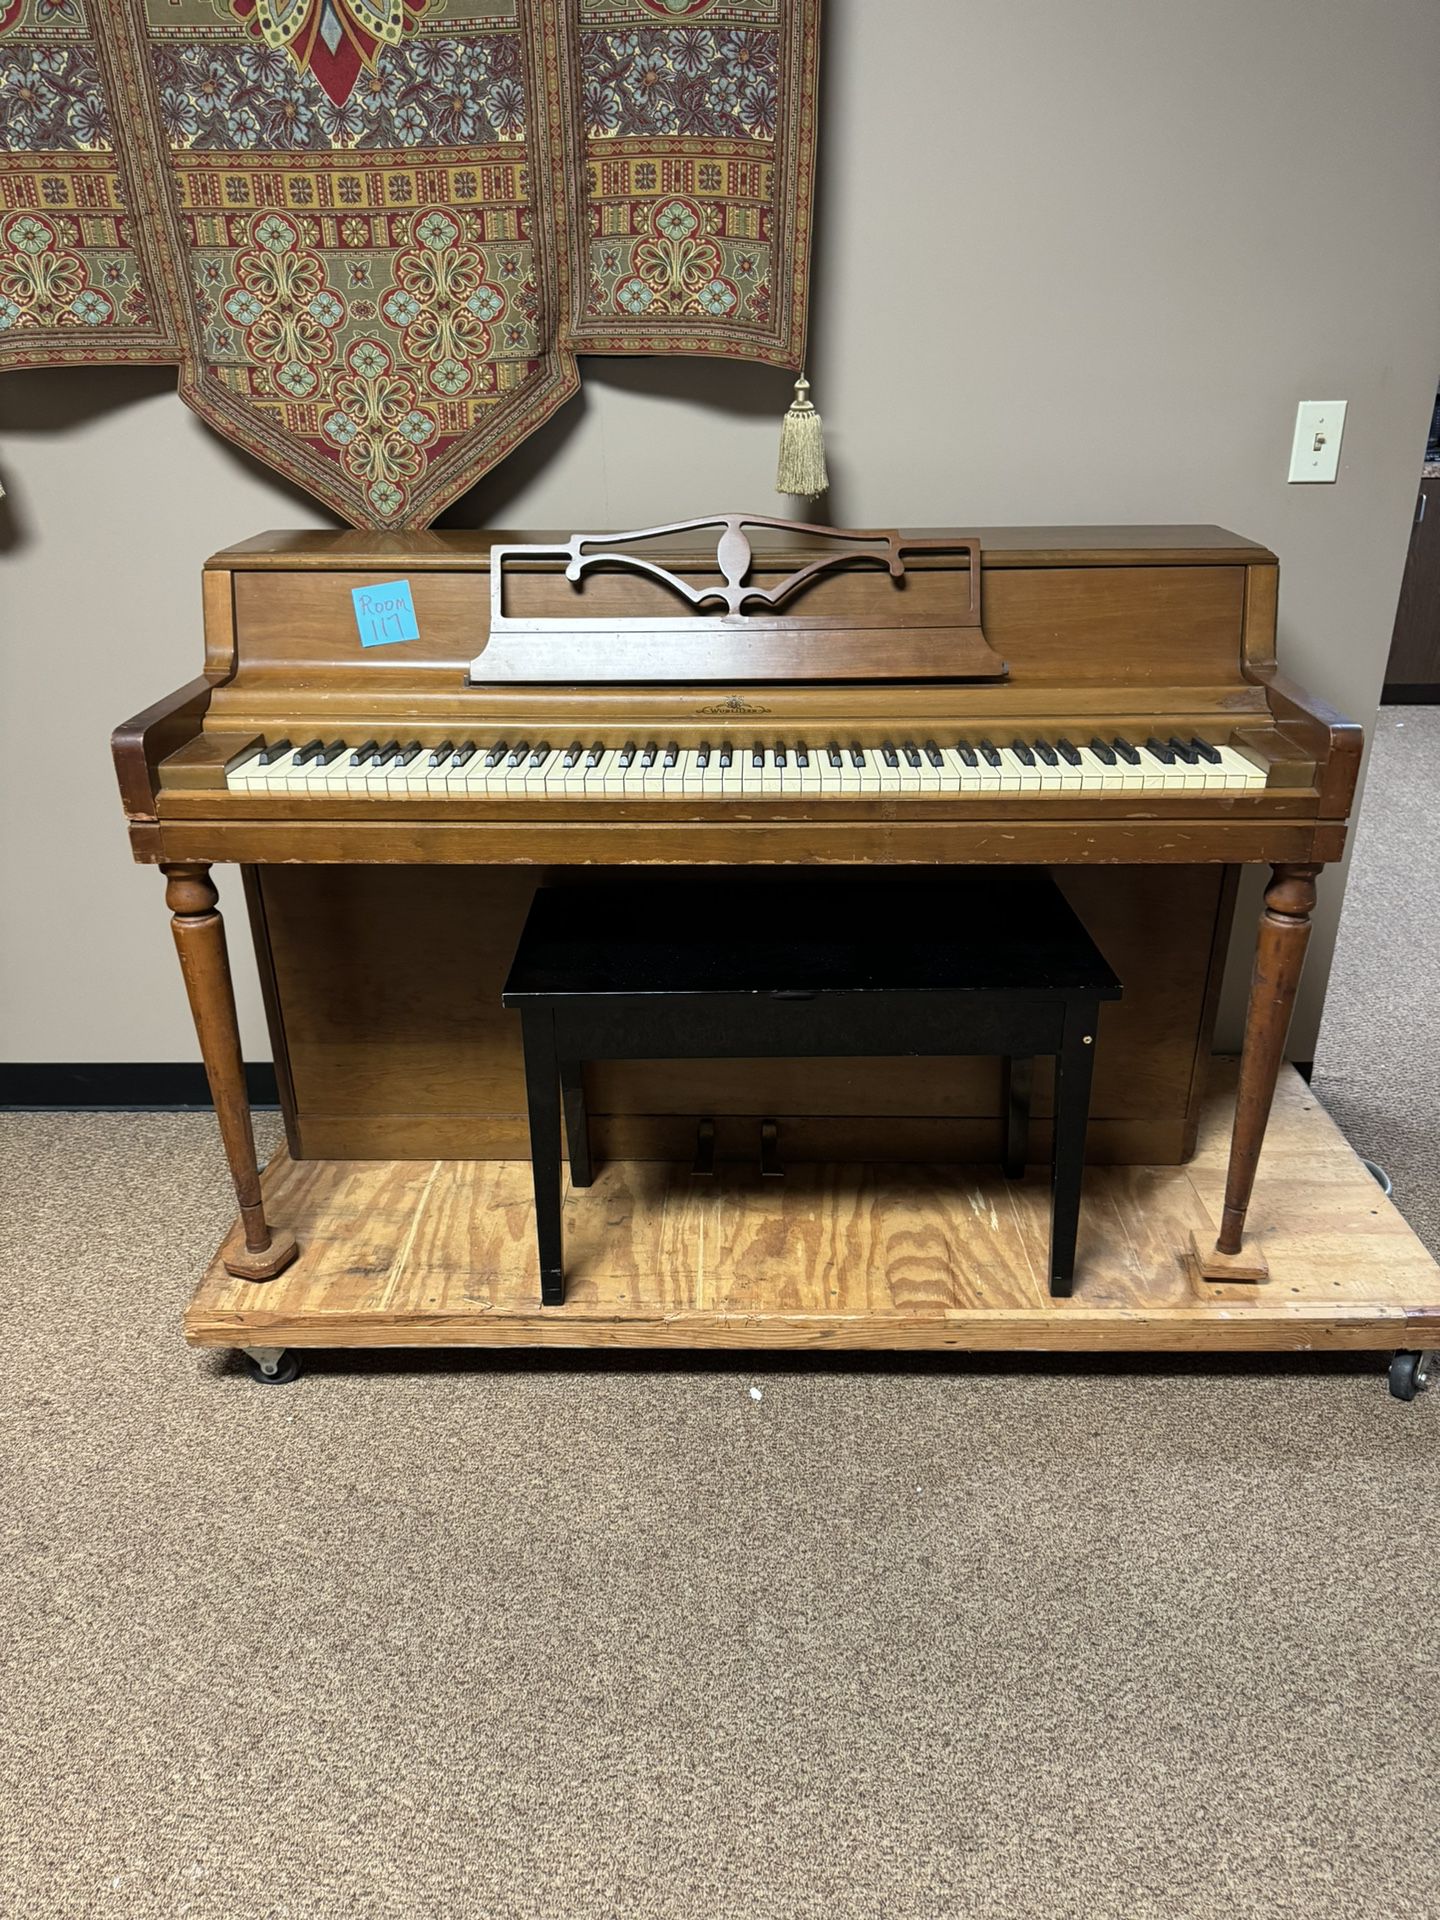 Wurlitzer Upright Piano & Bench $100 CASH ONLY — Missing 1 Wheel